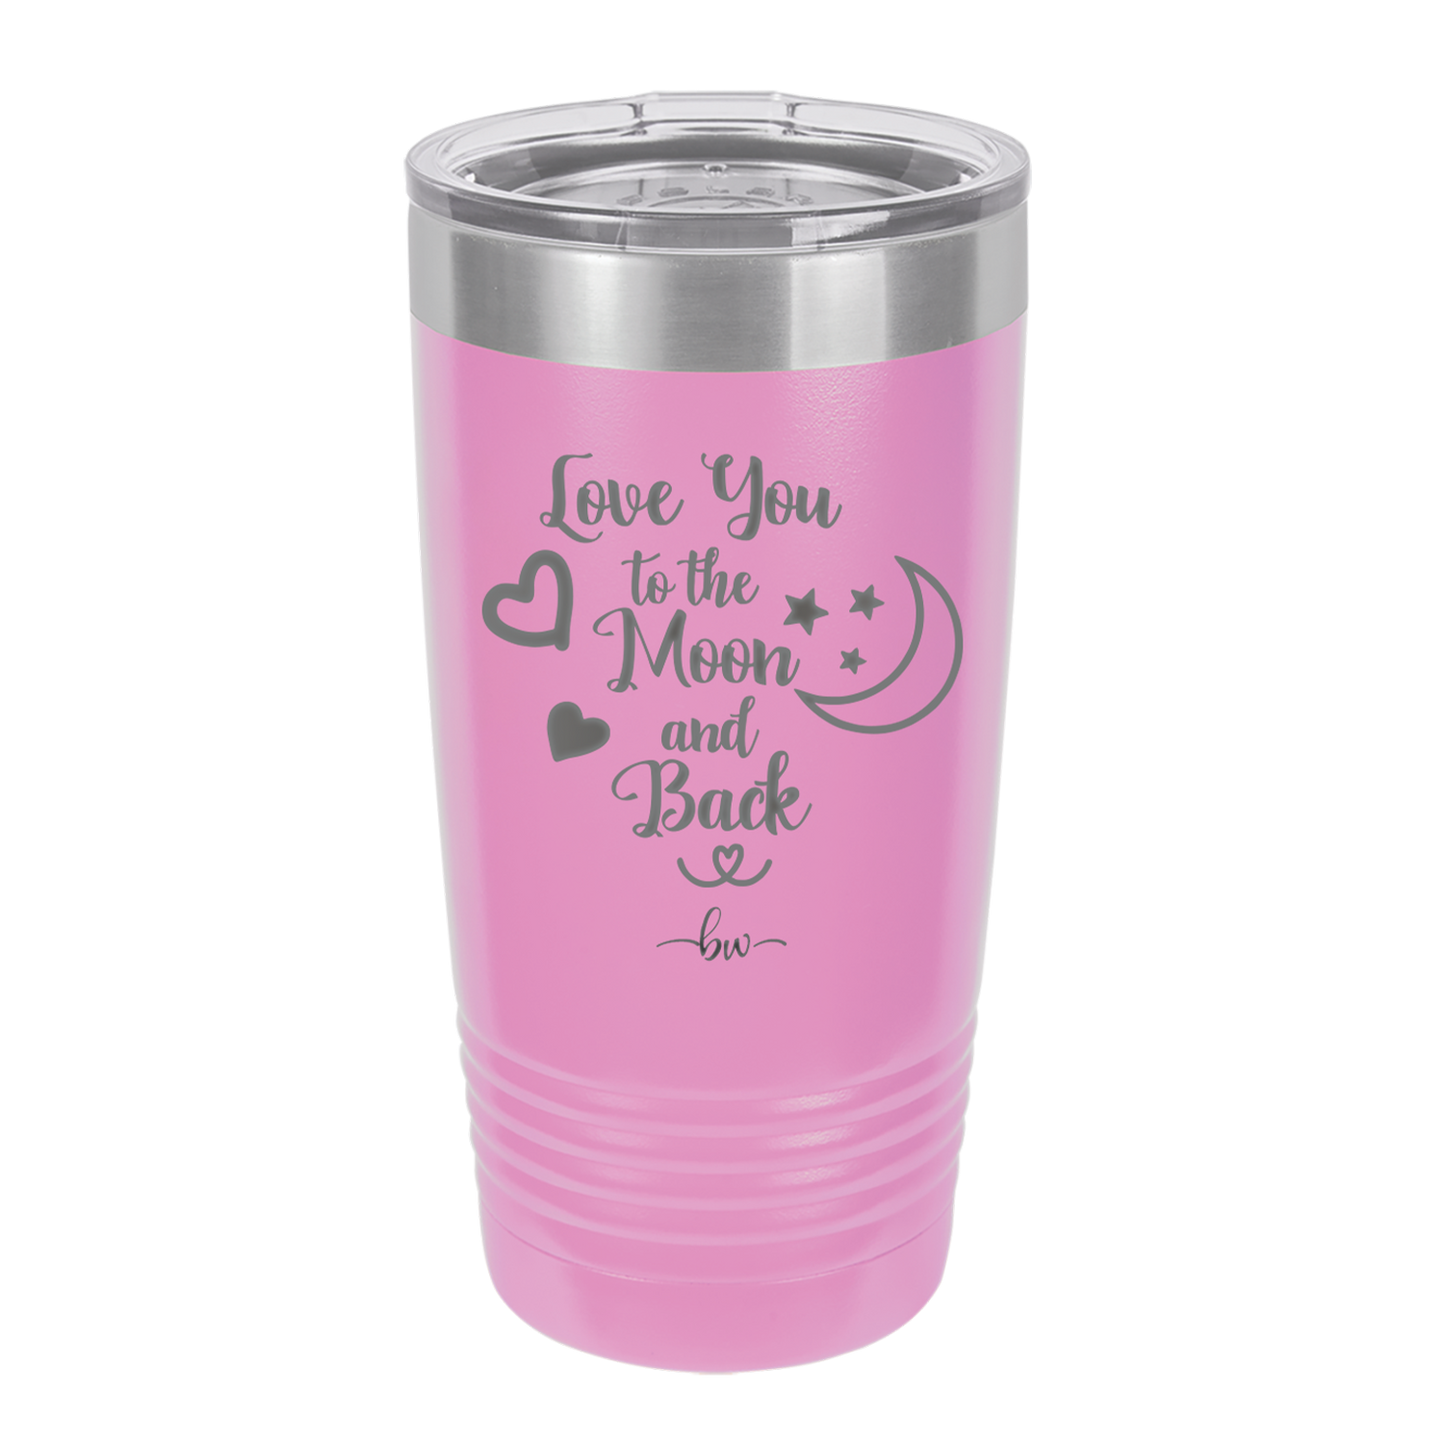 Love You to the Moon and Back - Laser Engraved Stainless Steel Drinkware - 1570 -